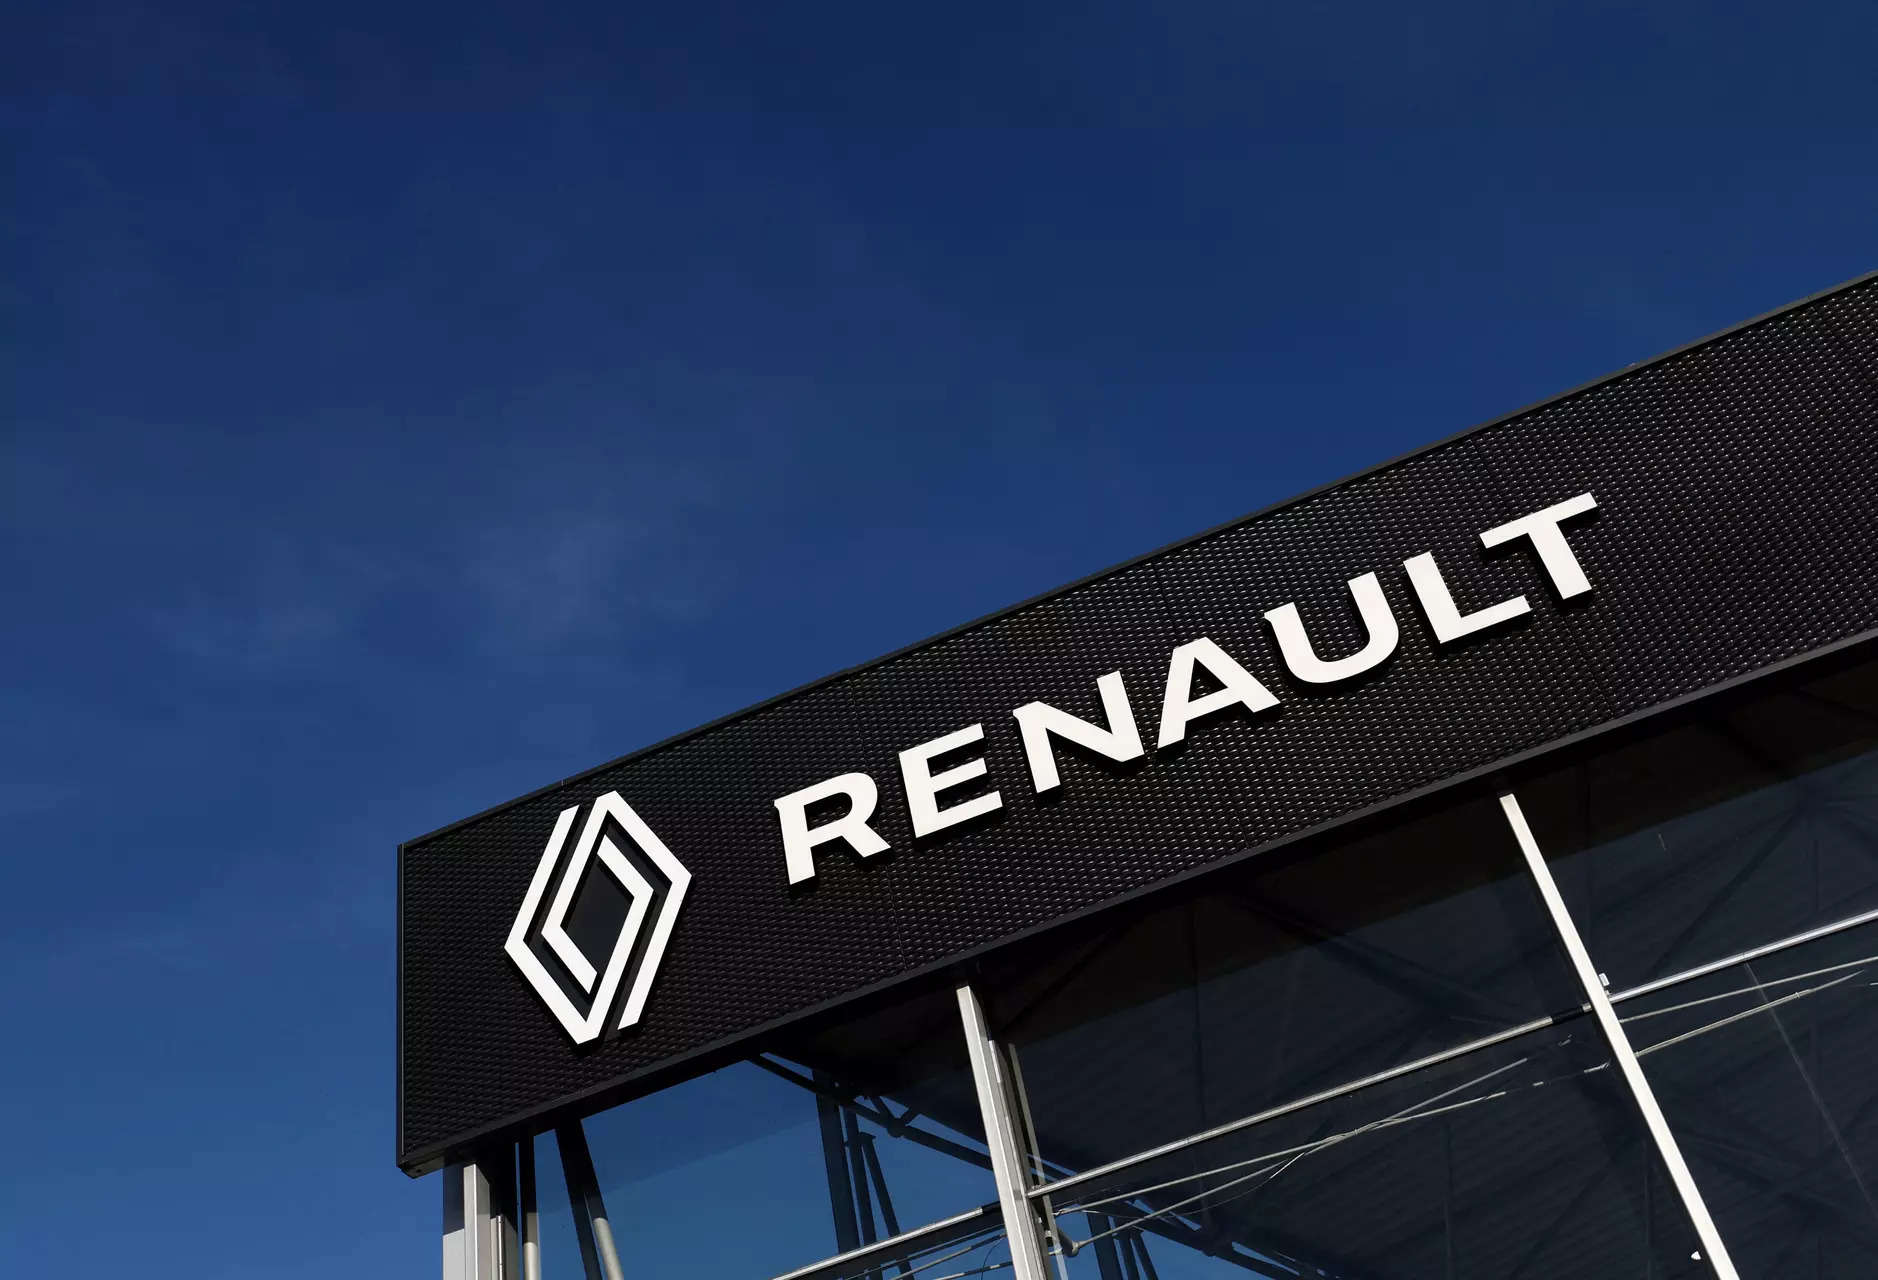 <p>Renault is in the middle of a turnaround plan and spurring a shift to electric models. It is launching seven new models this year, including two fully electric models and two hybrids.</p>